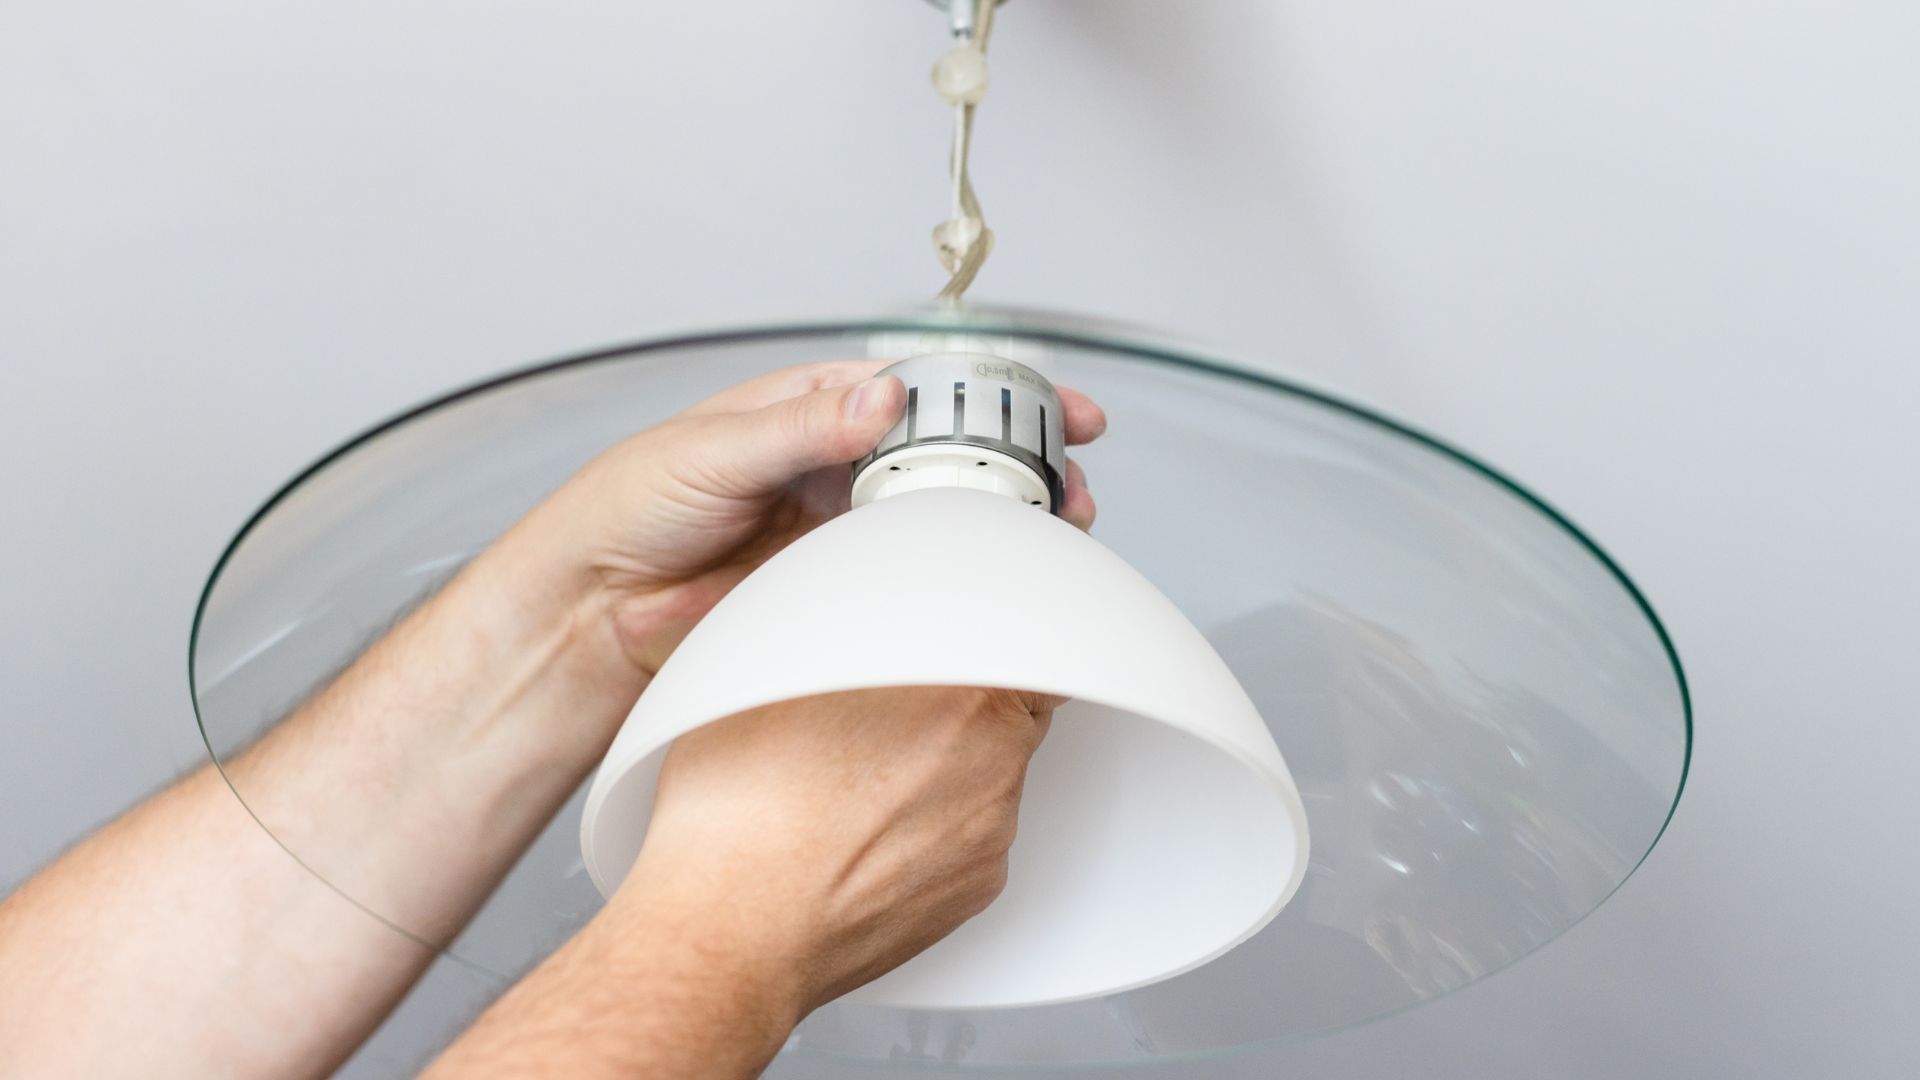 Causes of Light Fixture Issues: Electrical Services for Efficient Repairs